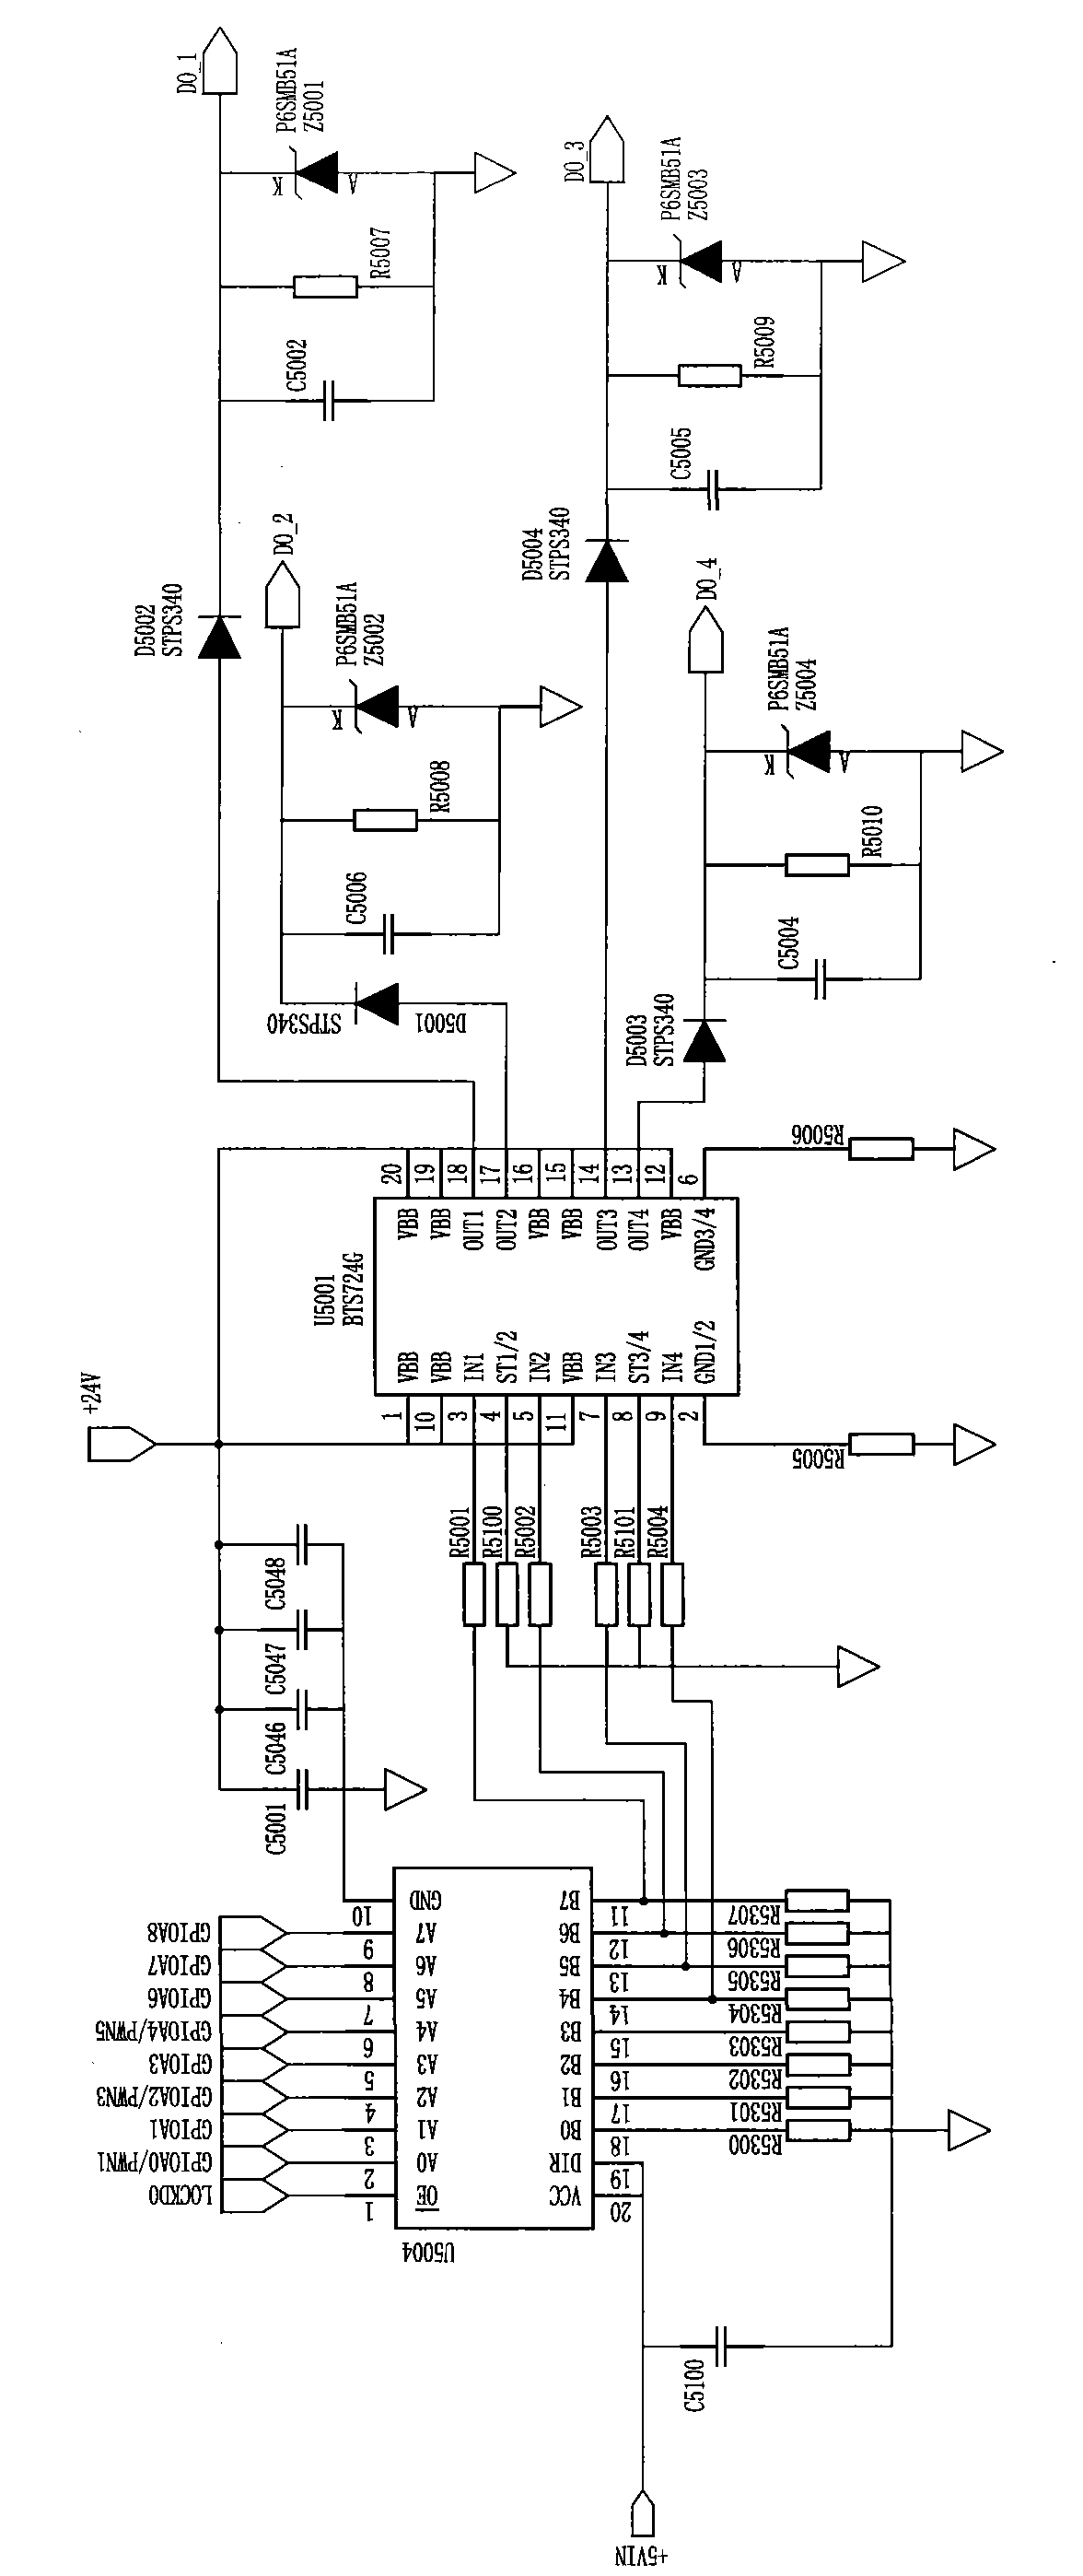 Dual-computer redundancy control method and control device thereof